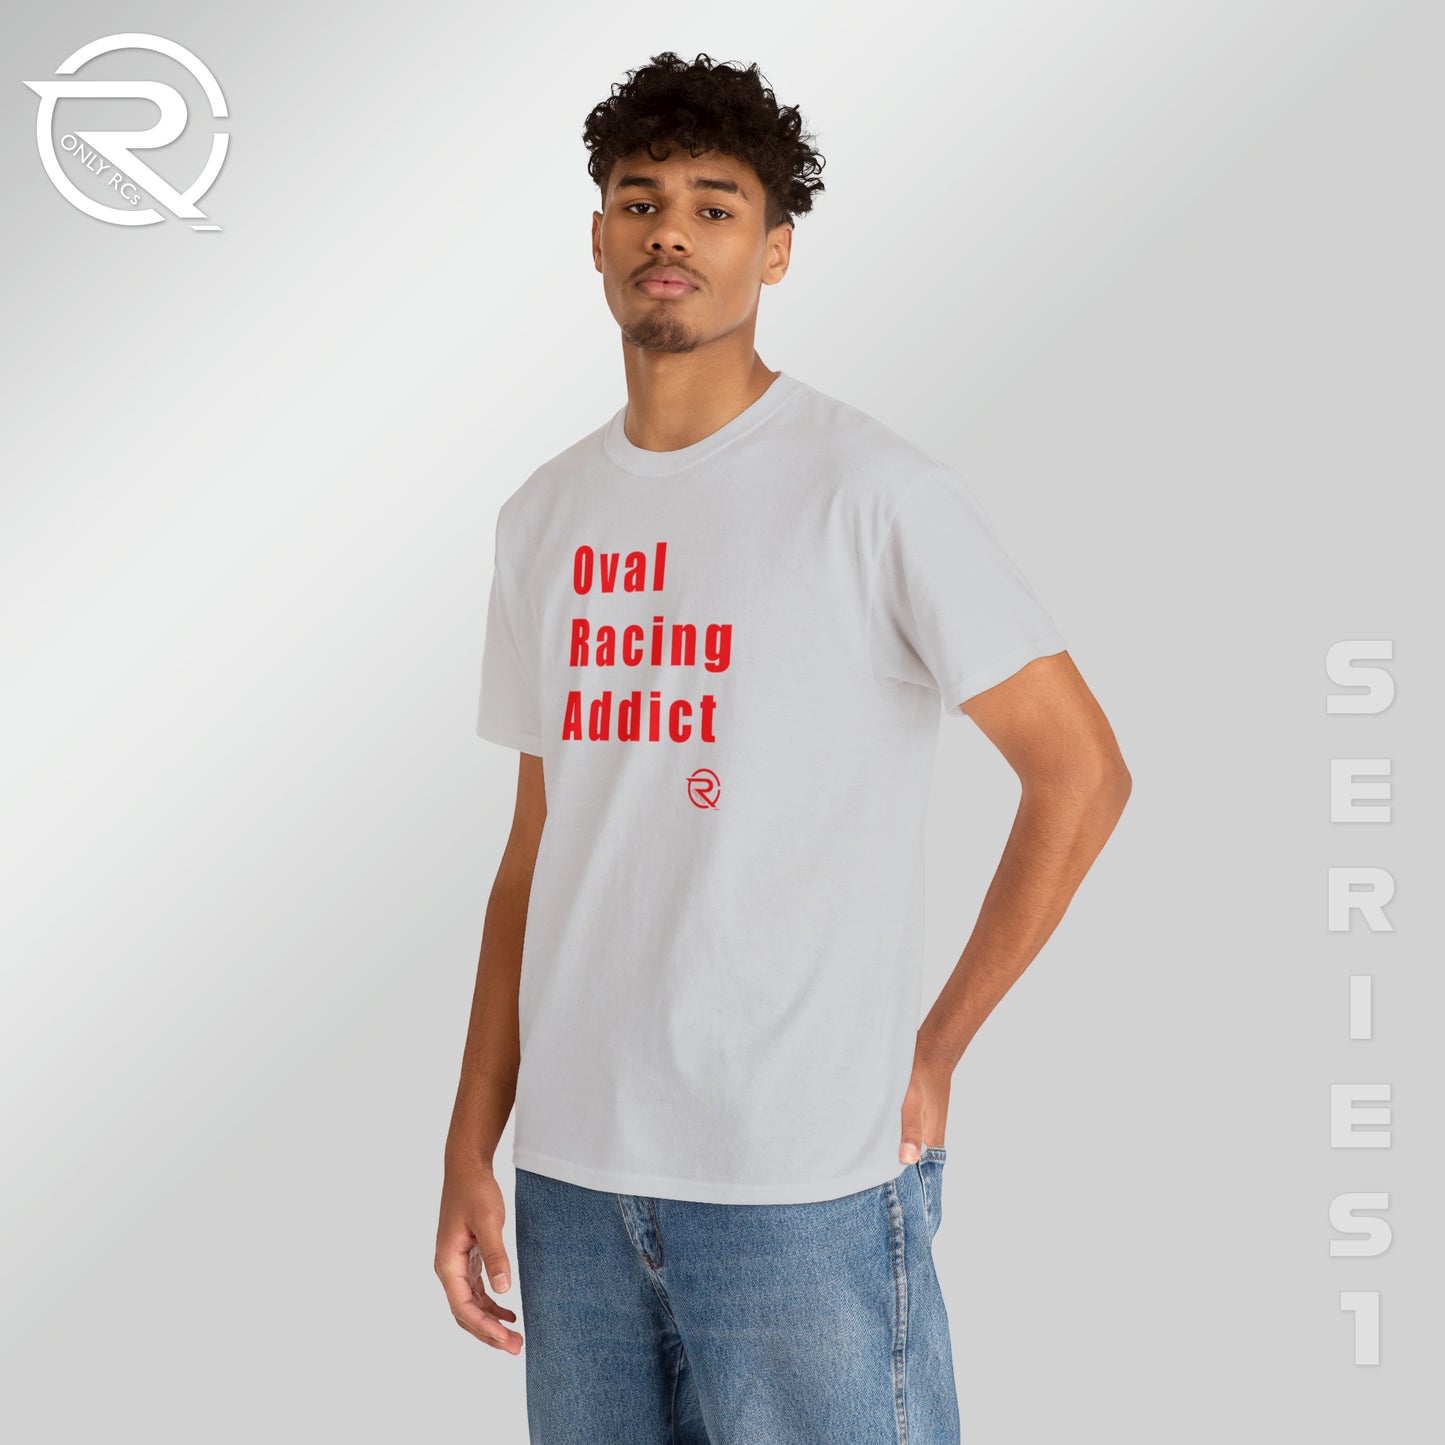 OnlyRCs - Oval Racing Addict Red Heavy Cotton Tee - Series 1